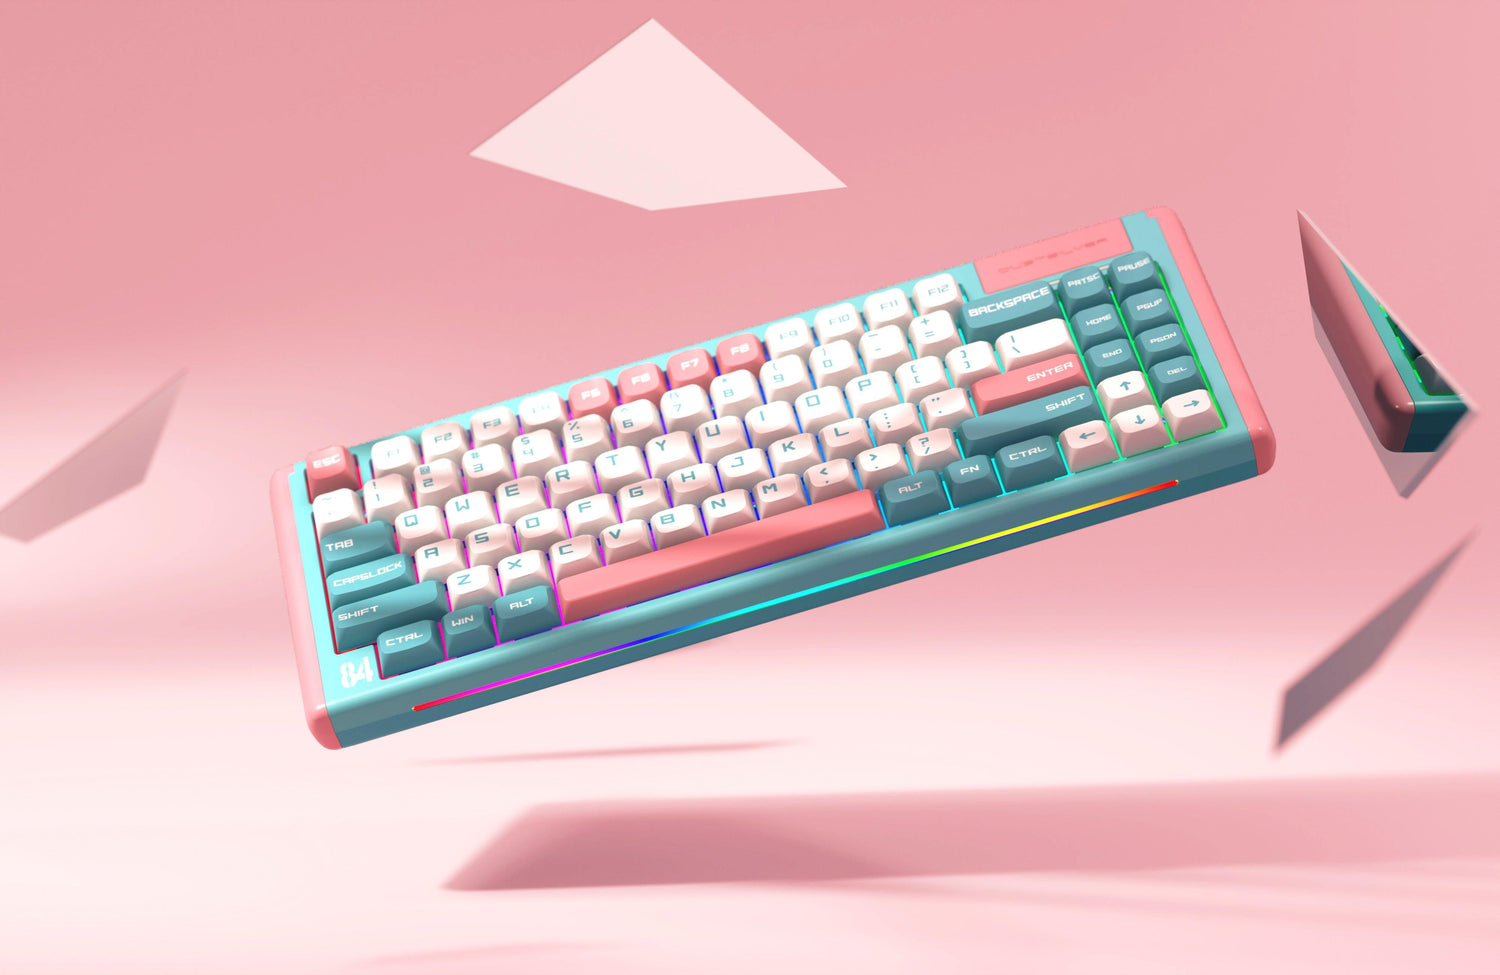 Are mechanical keyboards better for gaming? - dustsilver